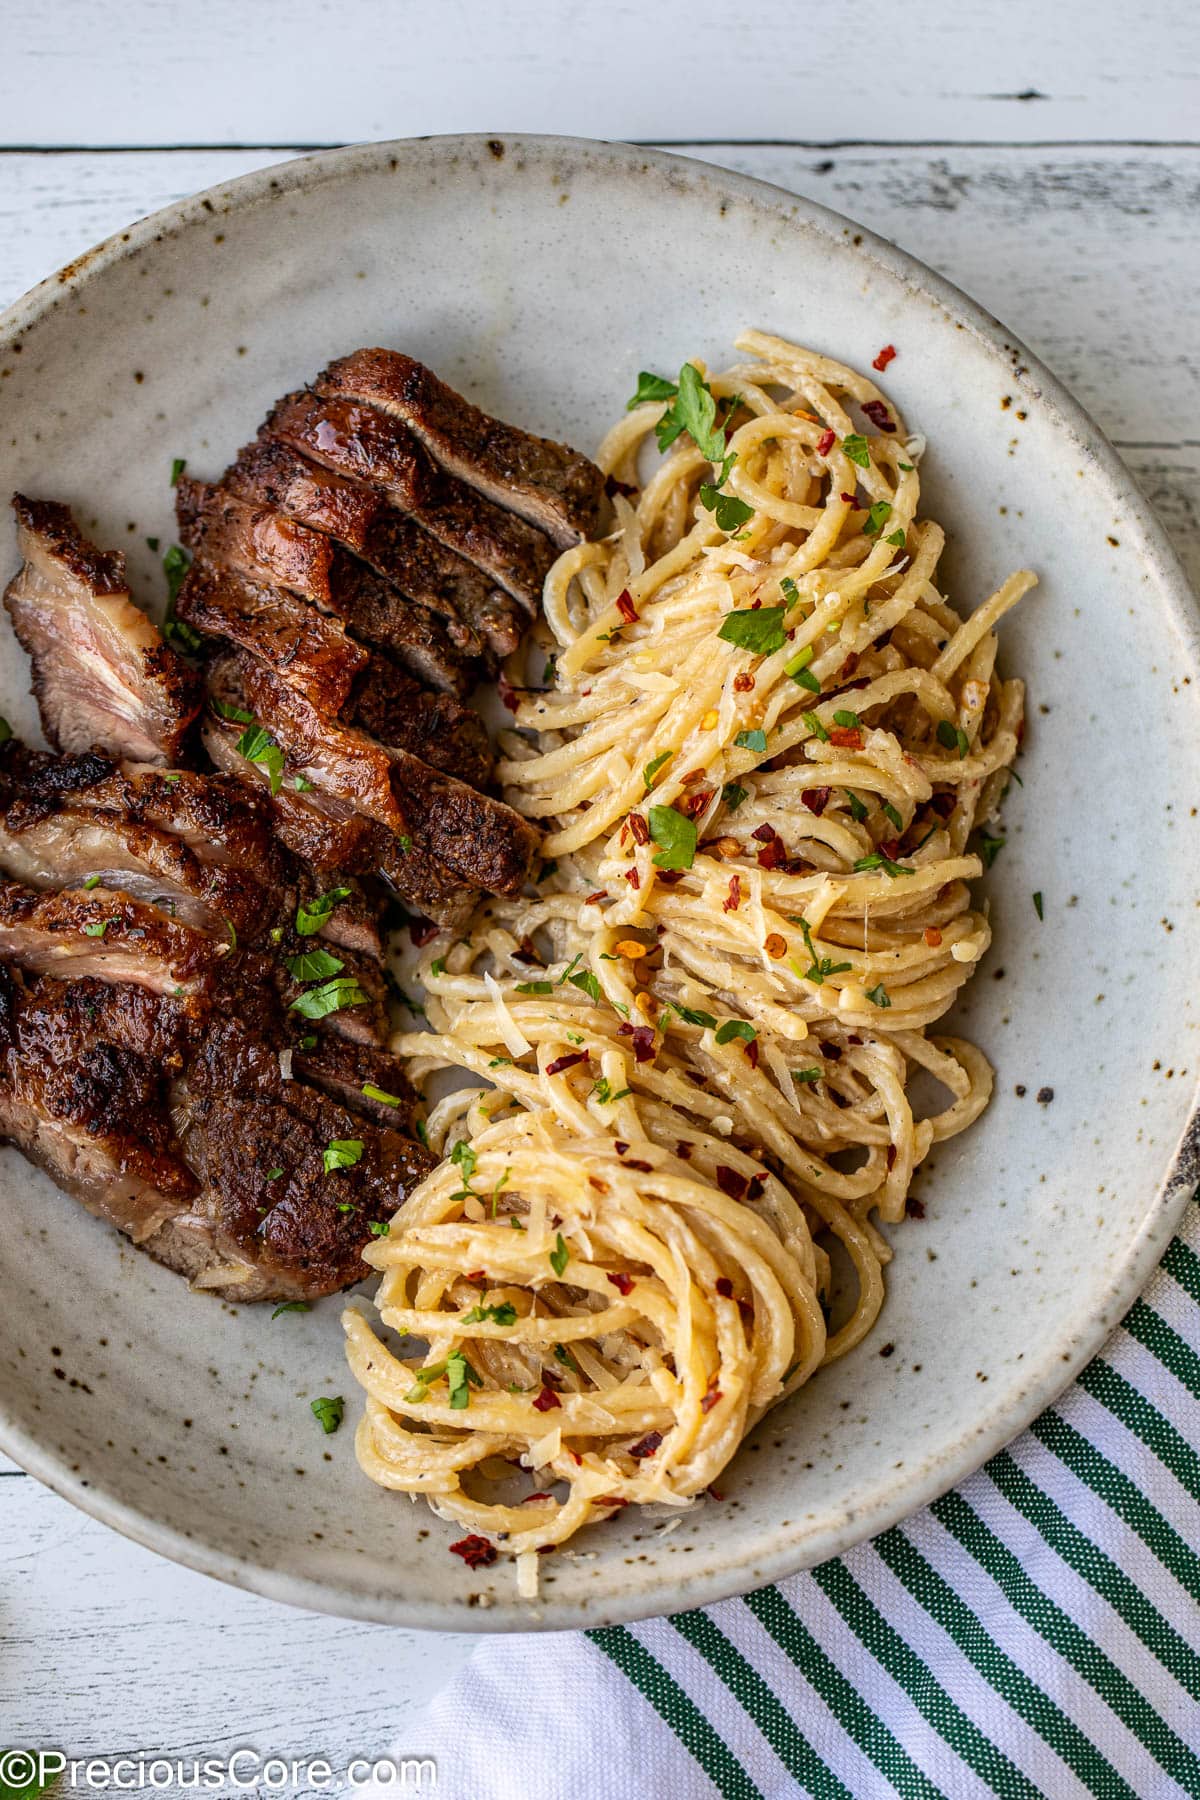 Plated steak and pasta with fresh herbs